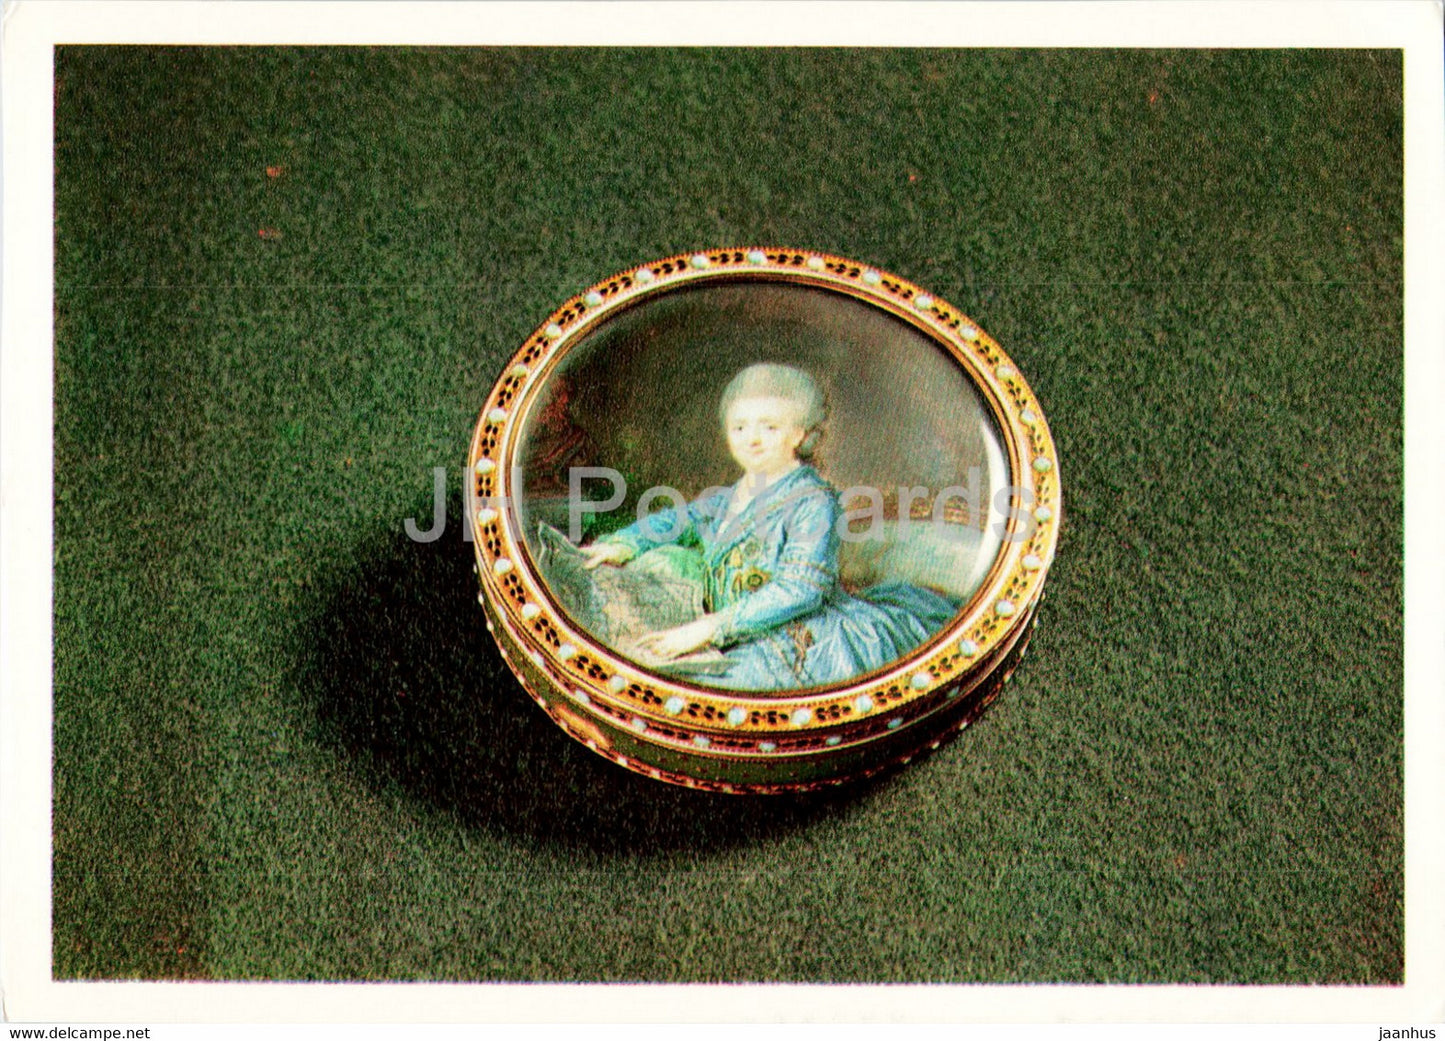 Snuff Box - Catherine the Great - Moscow Kremlin Armoury - 1976 - Russia USSR - unused - JH Postcards